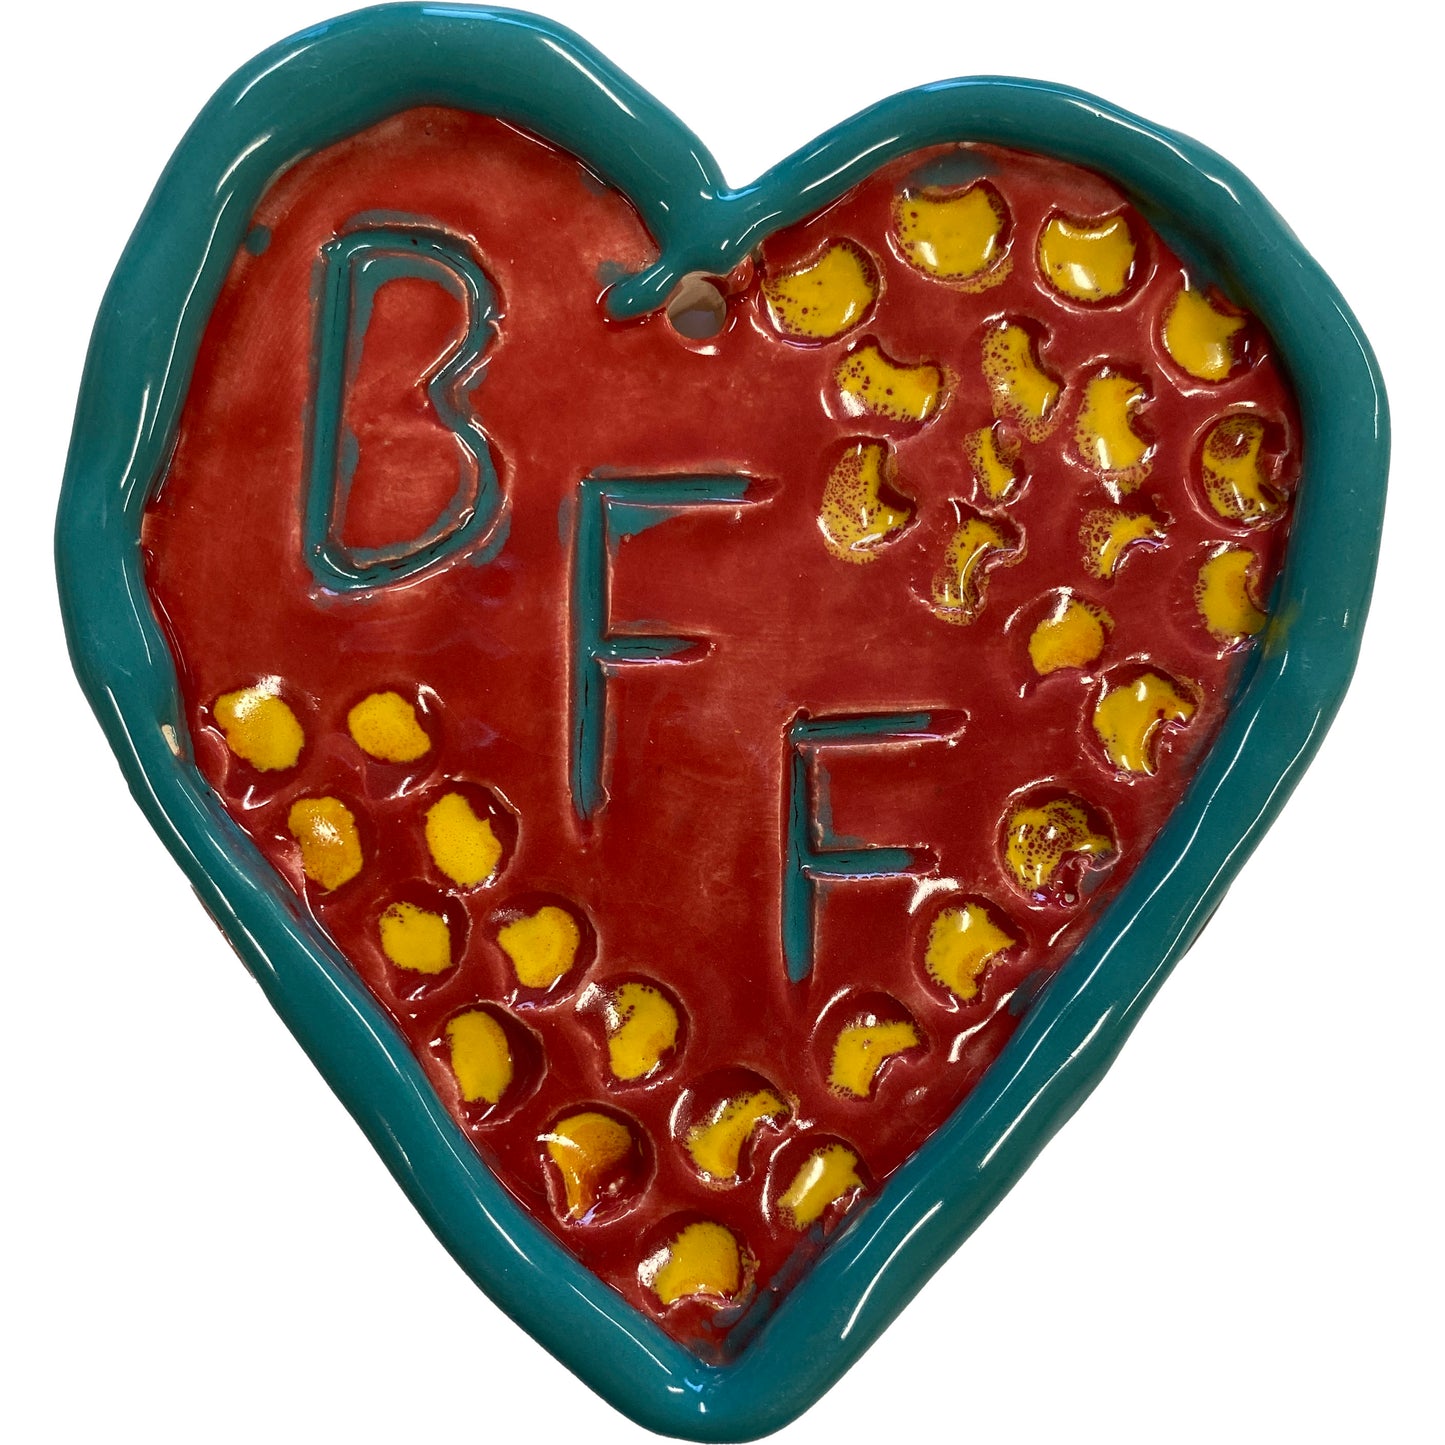 Ceramic Arts Handmade Clay Crafts Glazed 4-inch x 4-inch Best Friends Forever Heart made by Lisa Uptain